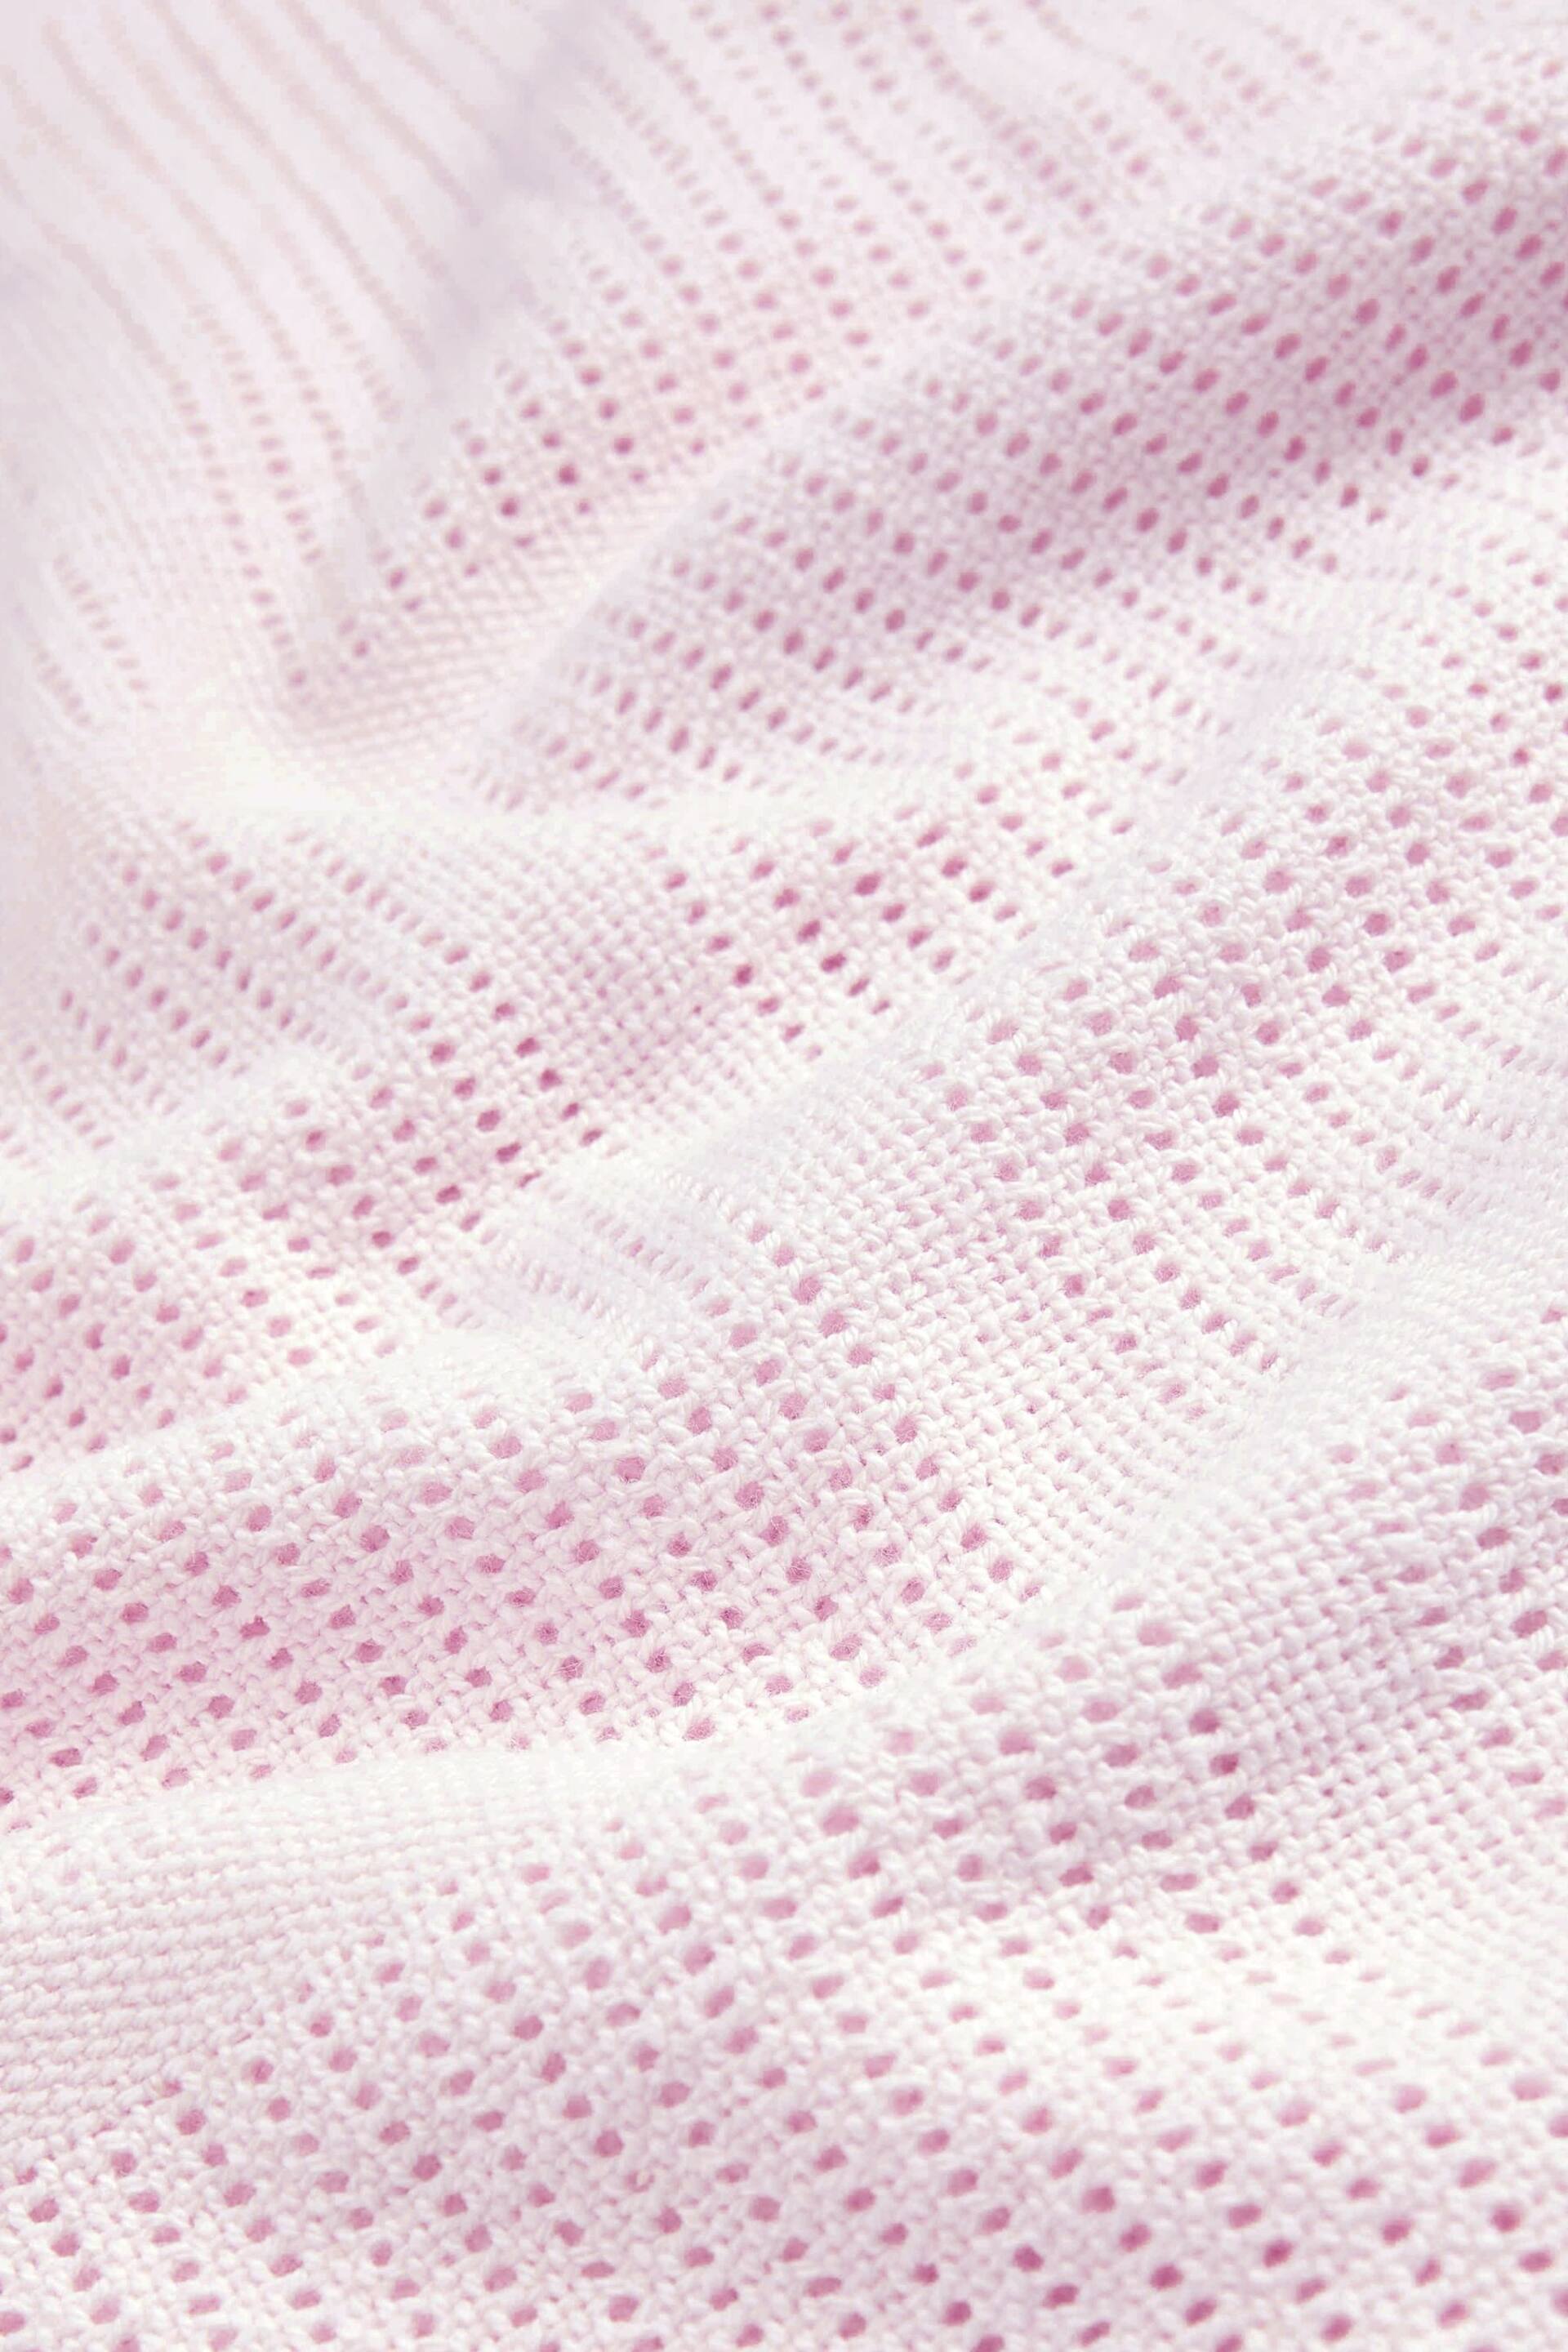 Pink Baby 100% Cotton Cellular Blanket - Image 7 of 7